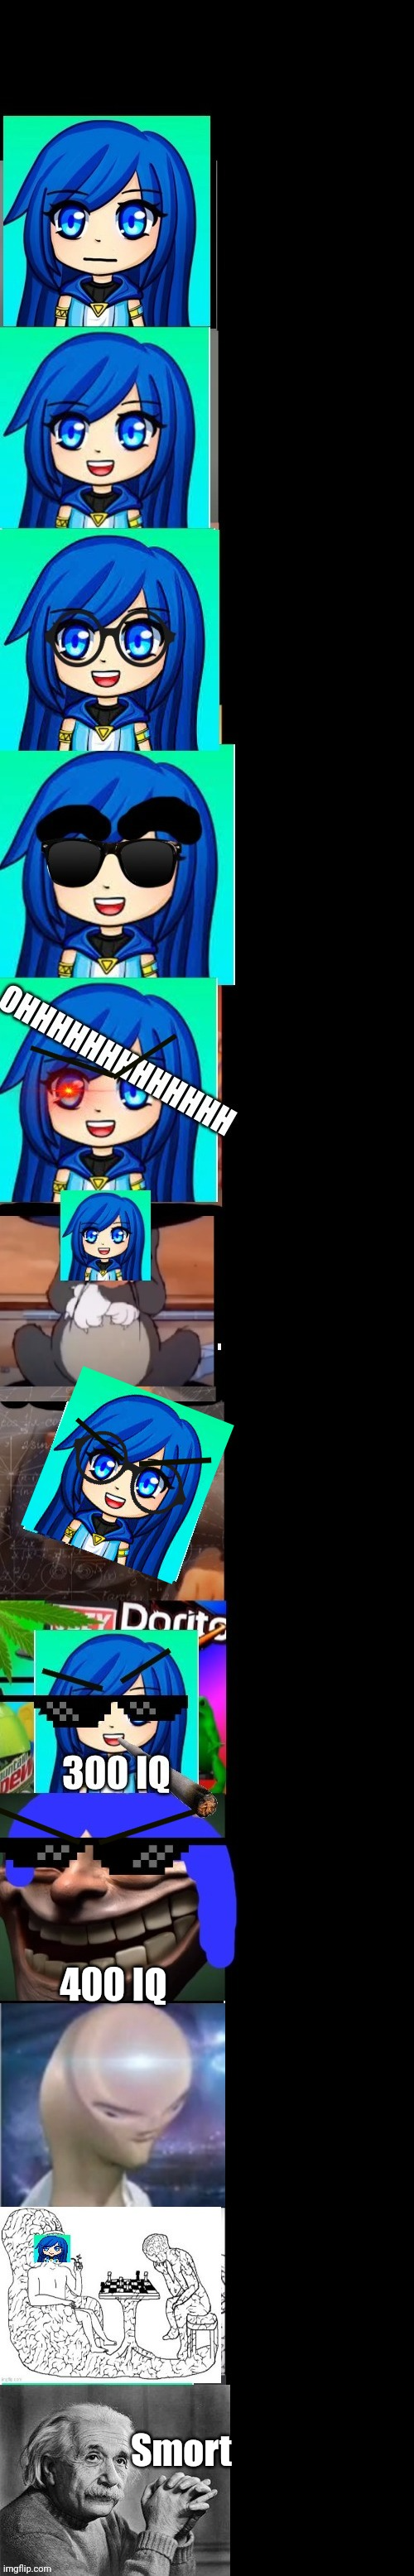 High Quality Itsfunneh becoming Smart Blank Meme Template